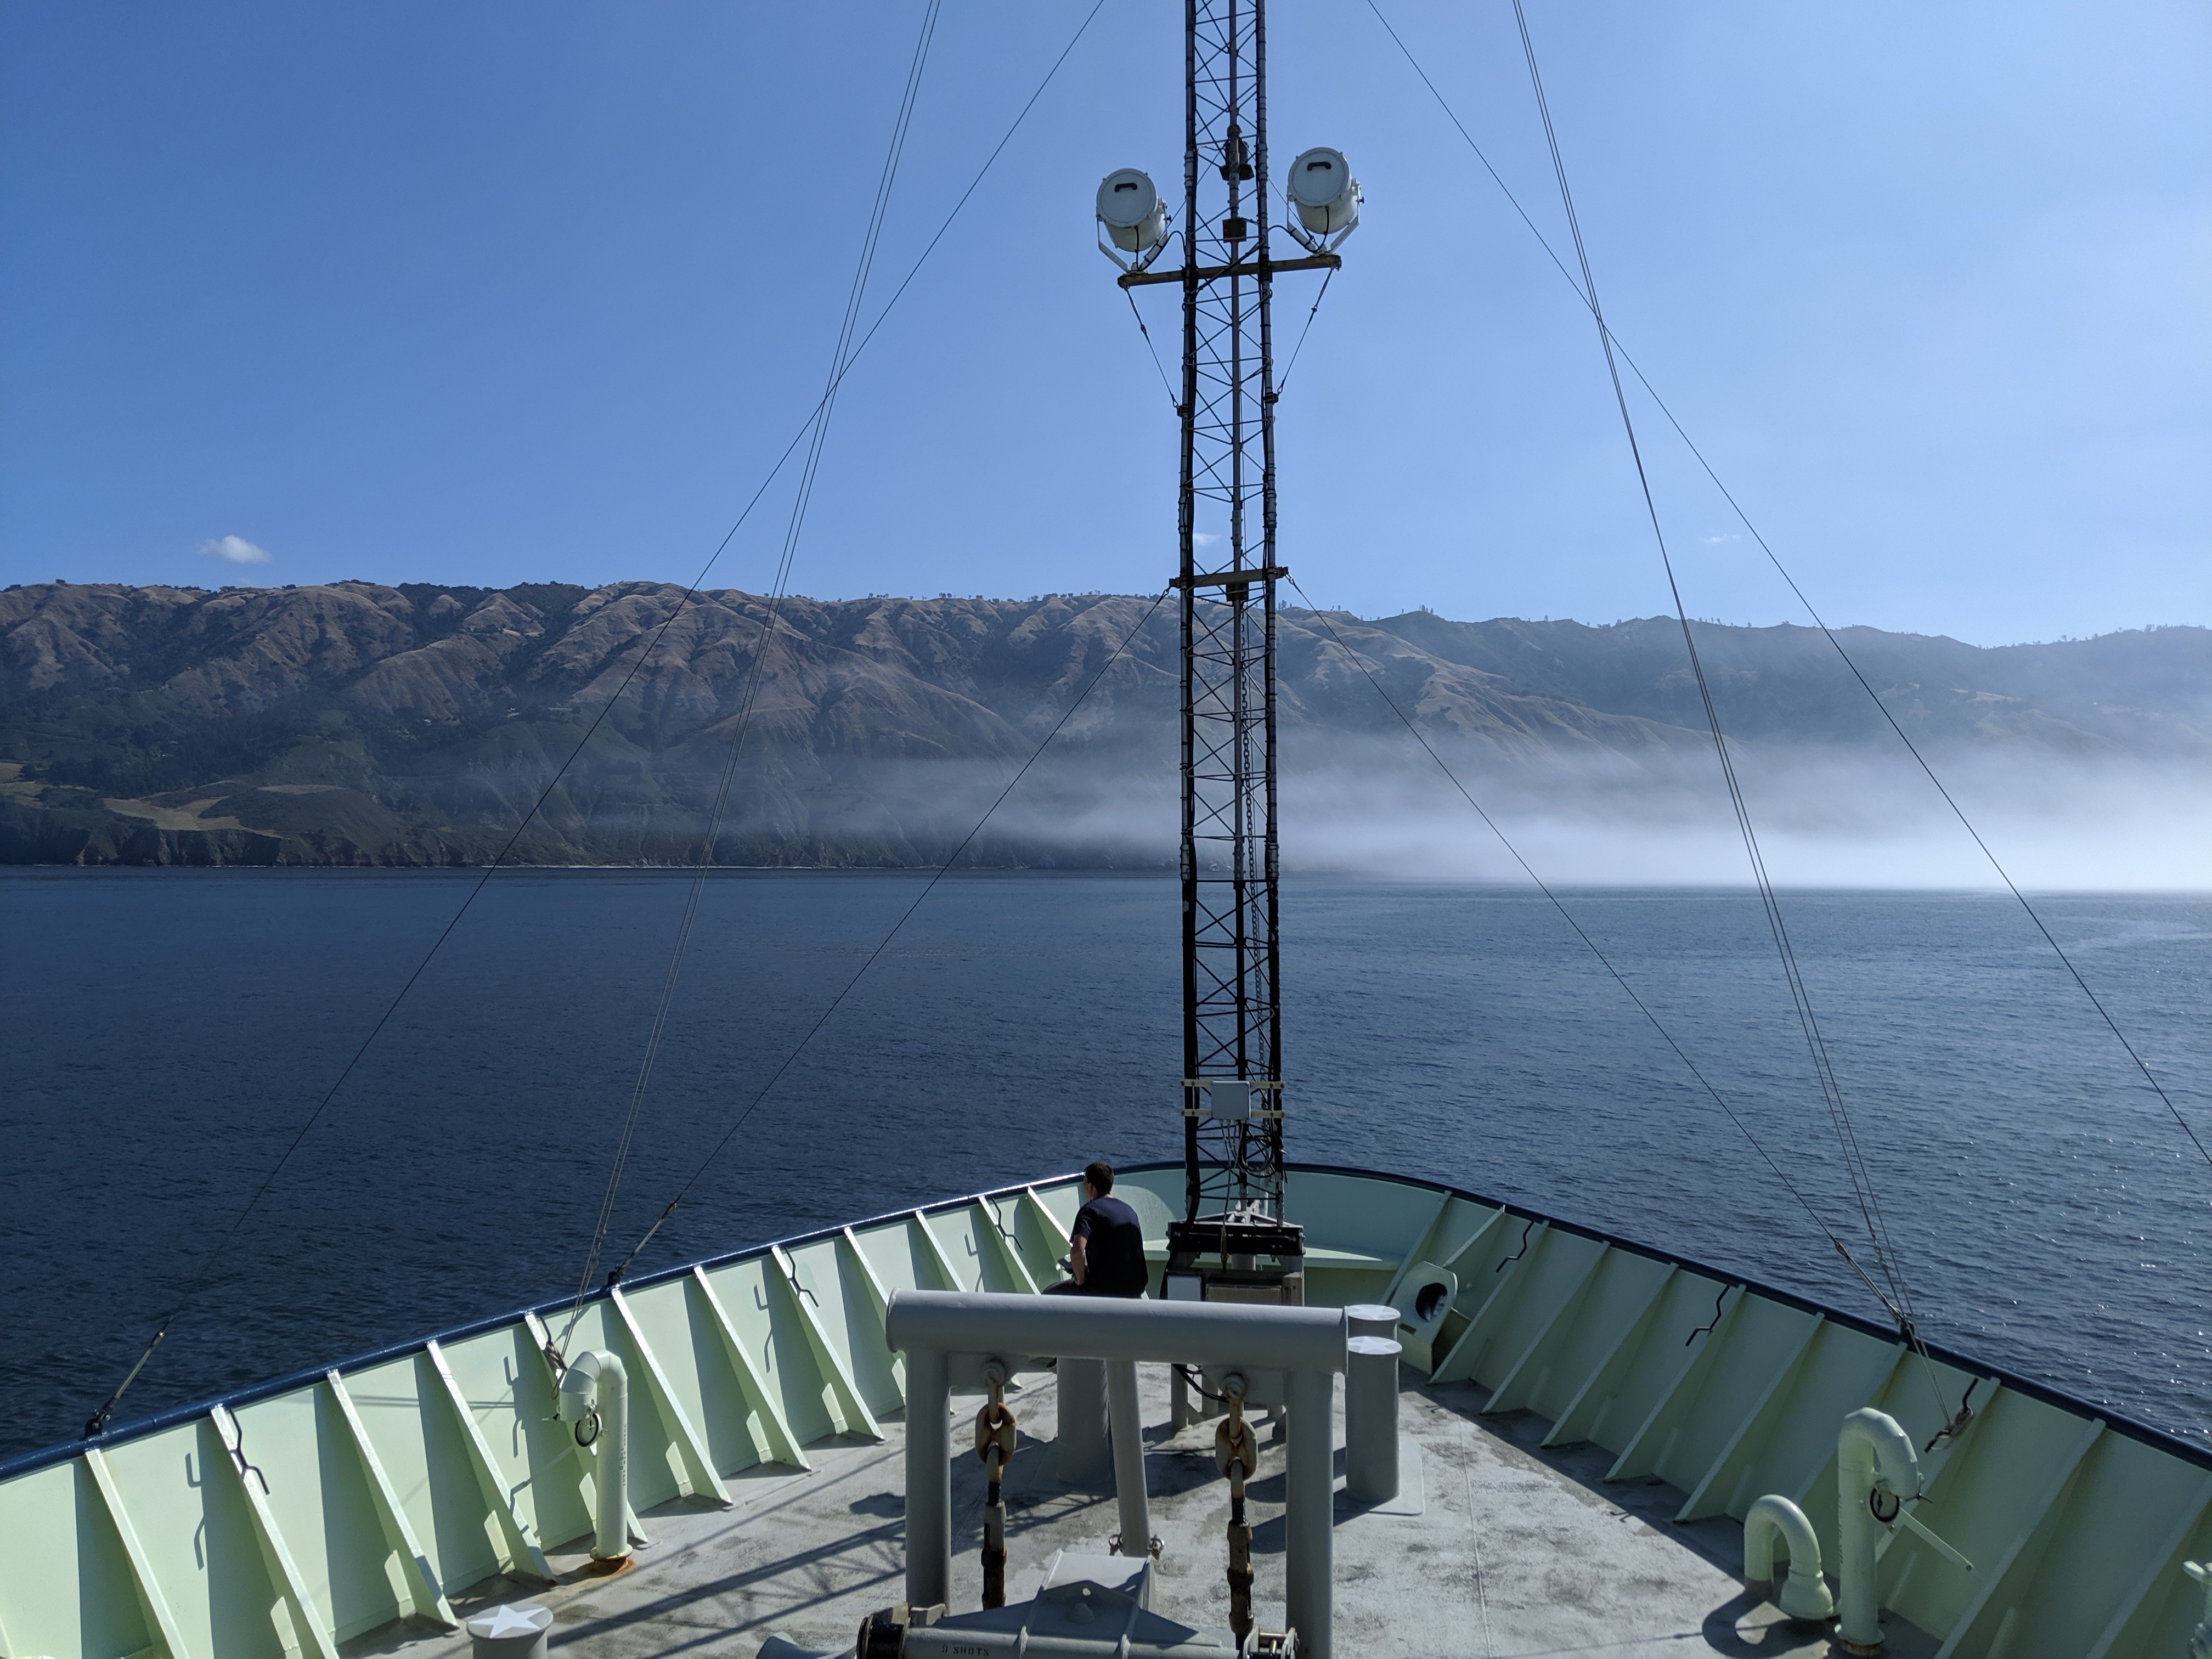 Scientists from JCVI and Scripps aboard R/V Atlantis in the Pacific Ocean off the coast of Big Sur, California.